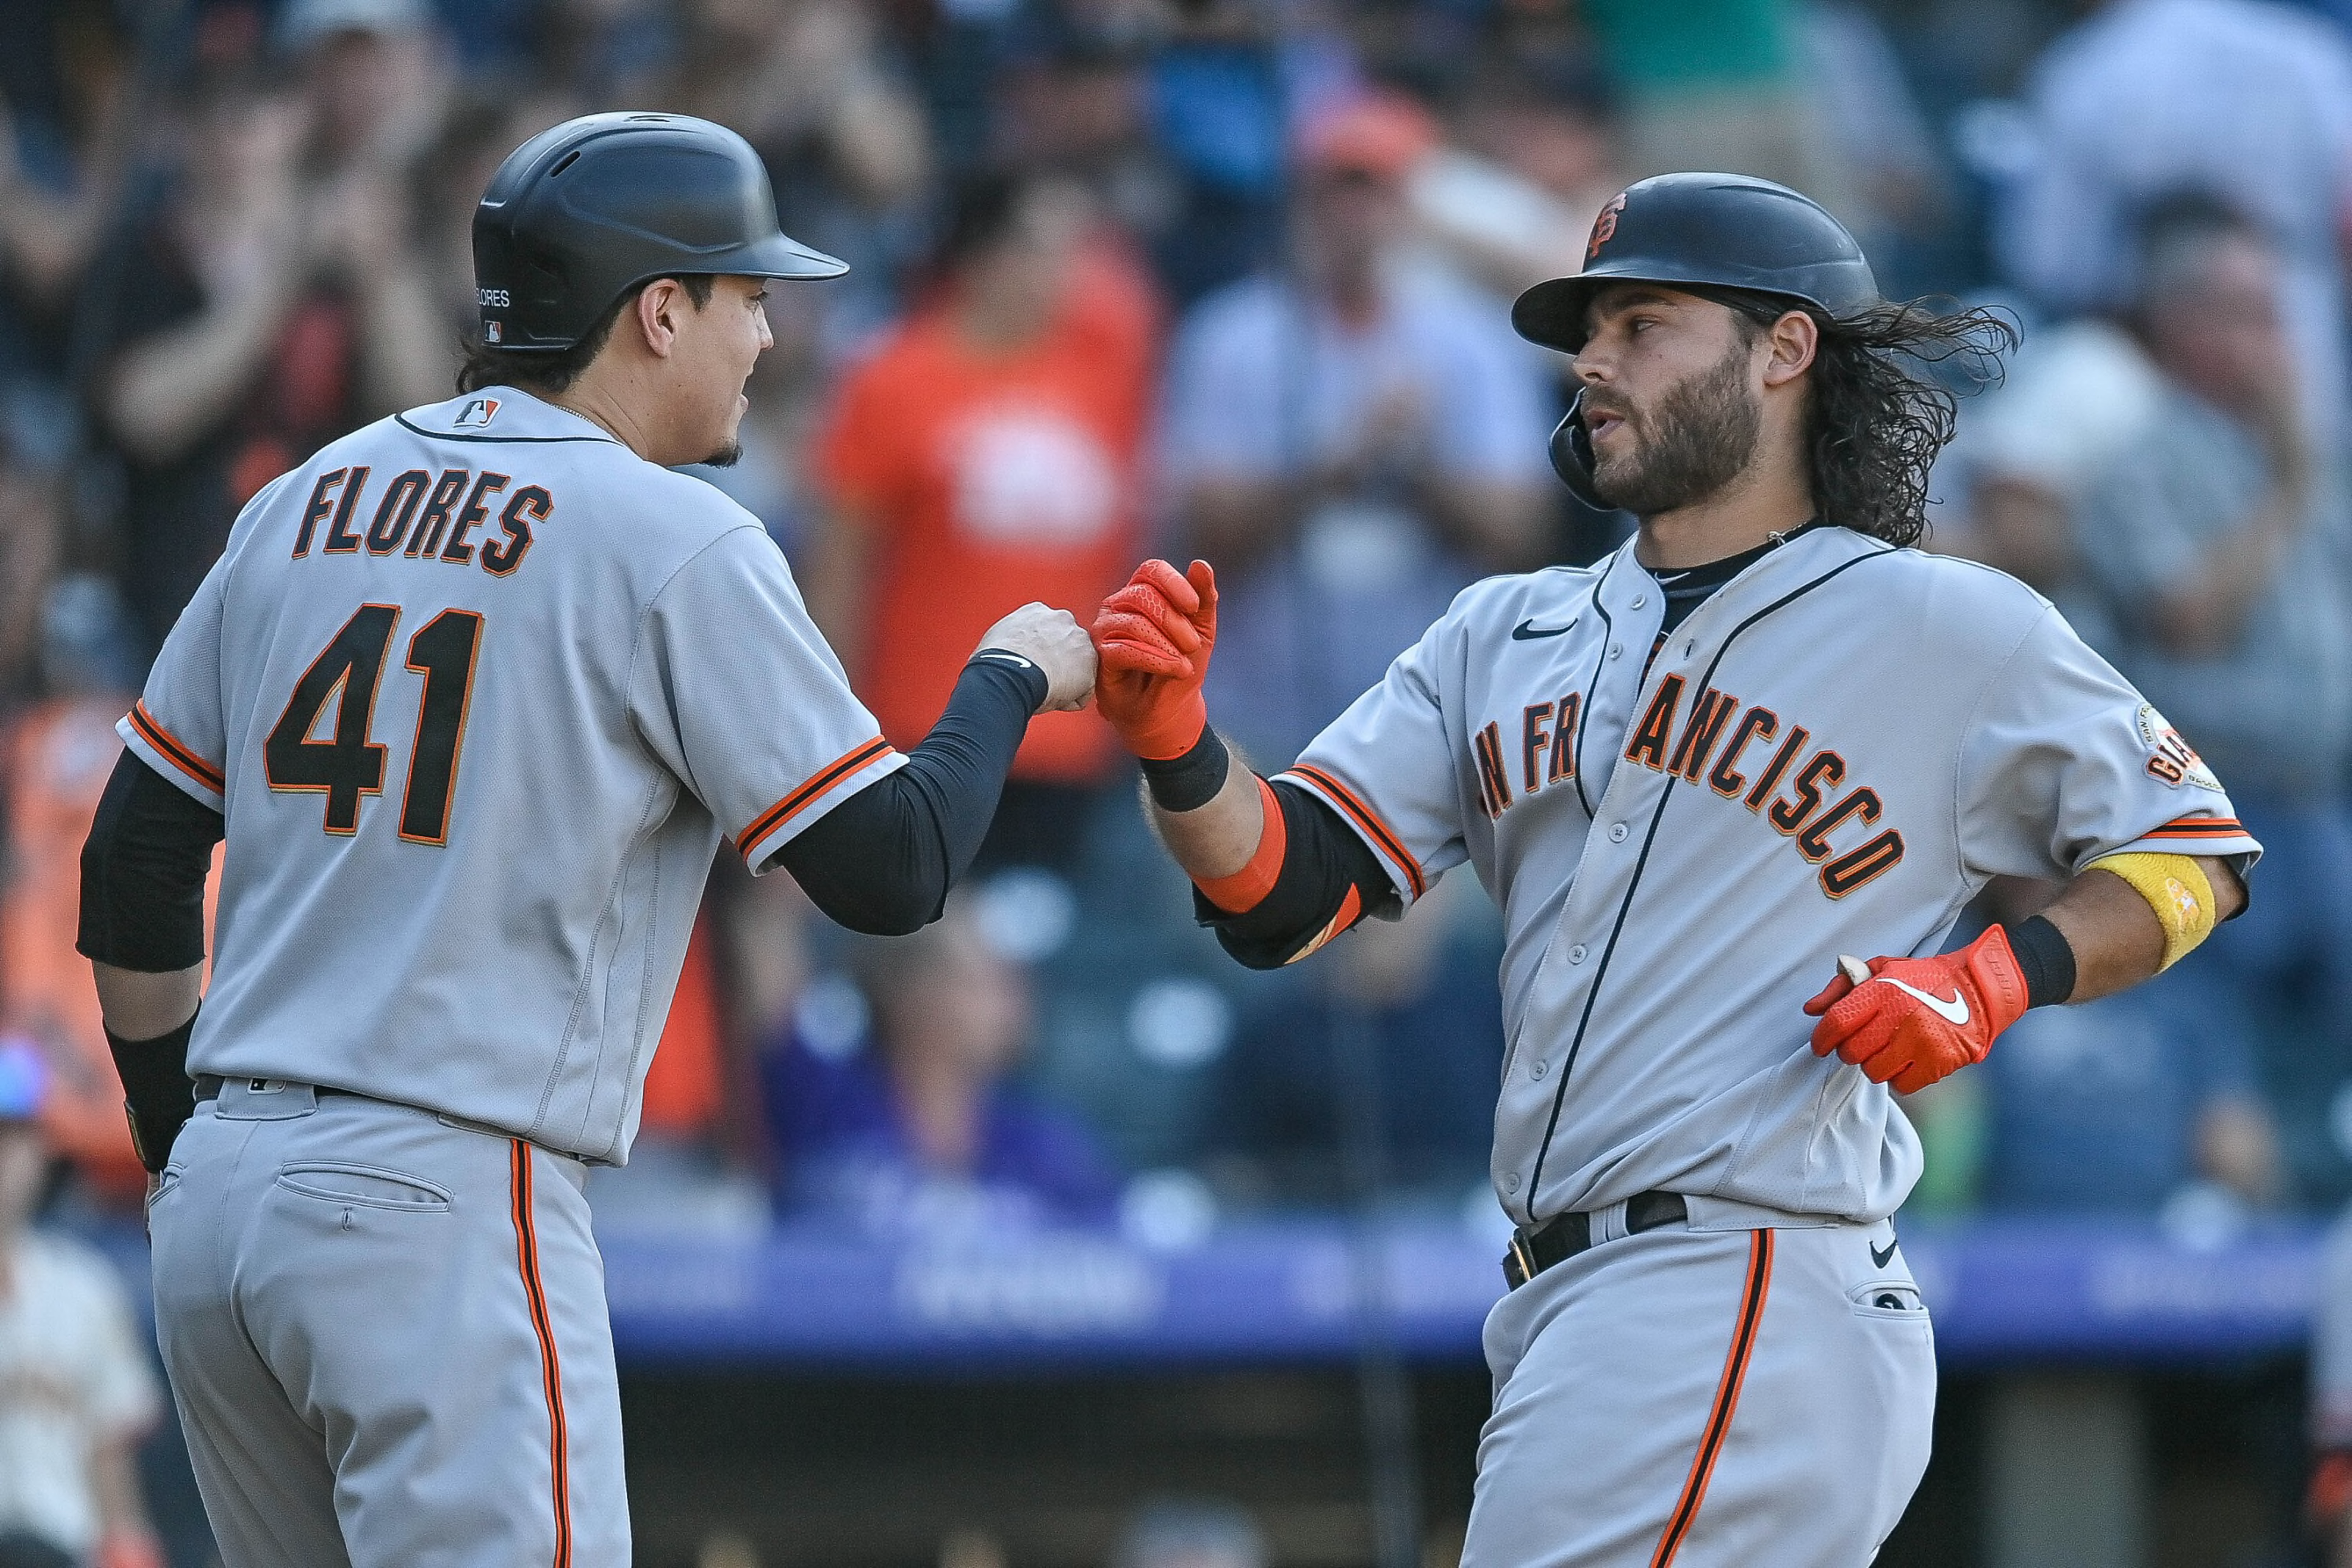 Francisco Giants: the 2022 lineup